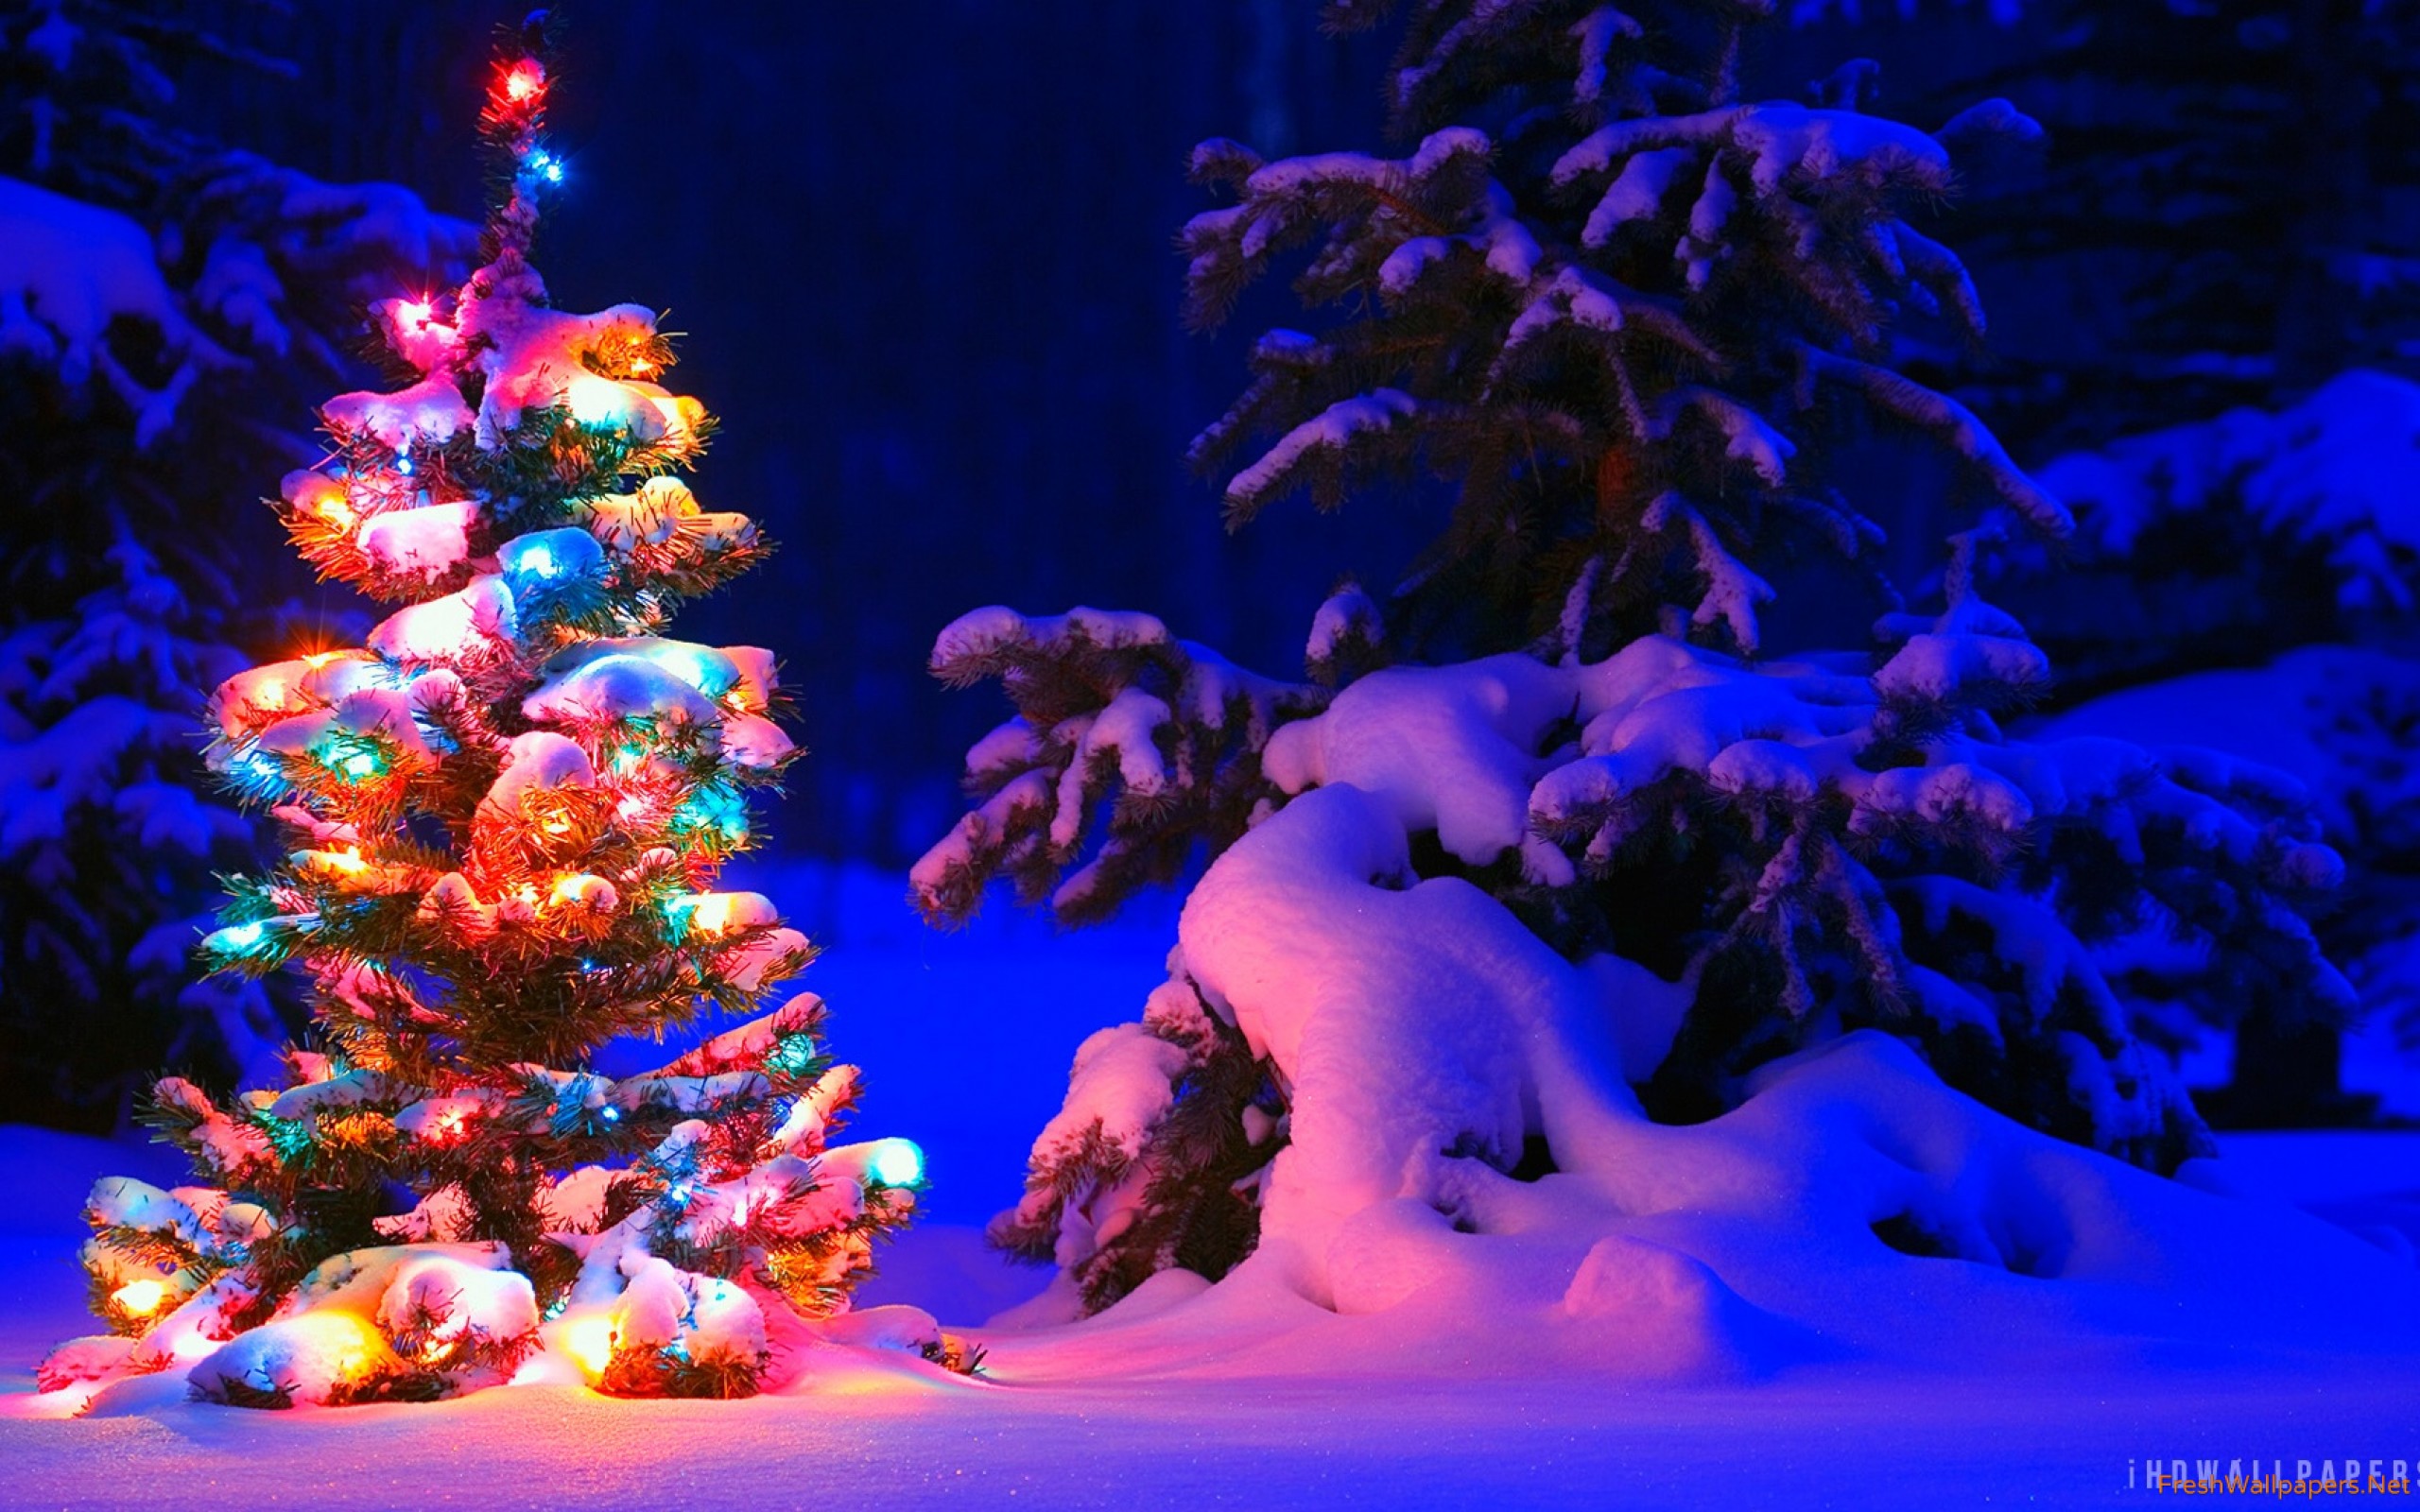 Christmas Pictures Snow Wallpapers